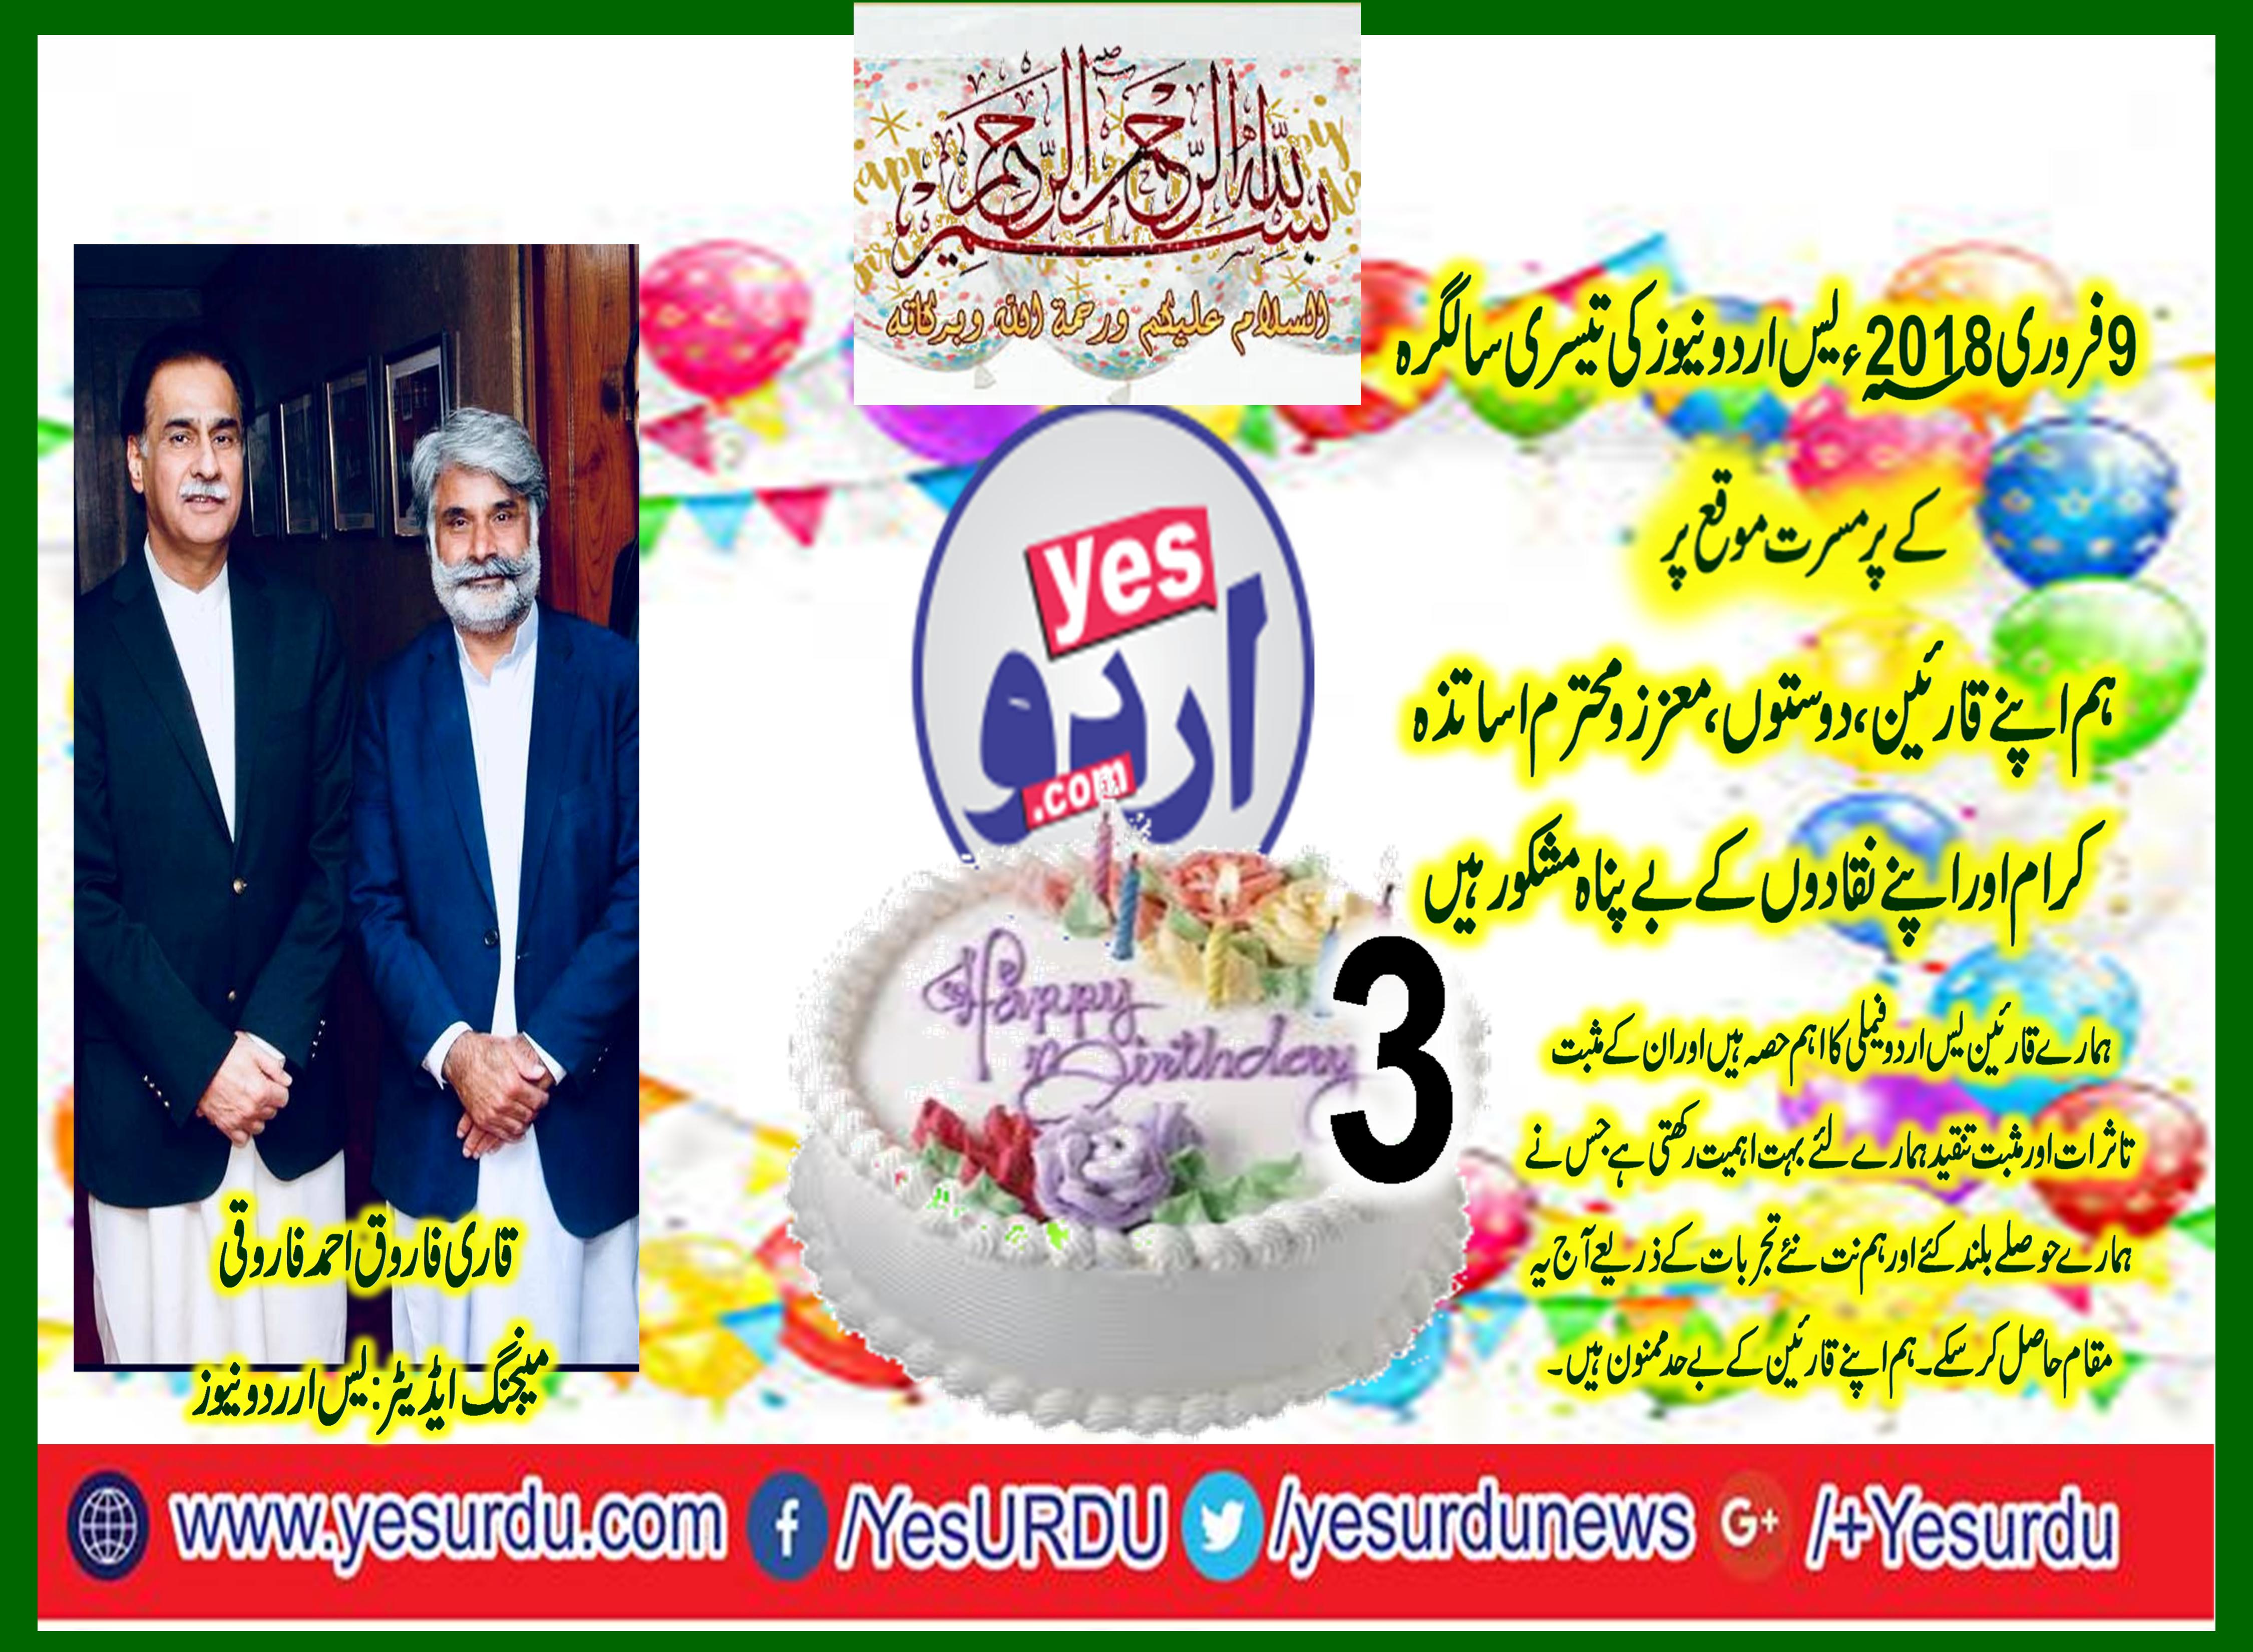 THIRD, BIRTHDAY, OF, YES URDU, NEWS, QARI FAROOQ AHMED, MANAGING, EDITOR, SENT, THE, MESSAGE, TO, READERS, AND, STAFF, OF, YES URDU, NEWS, ON, GREAT, DEDICATION, AND, HARD, WORK